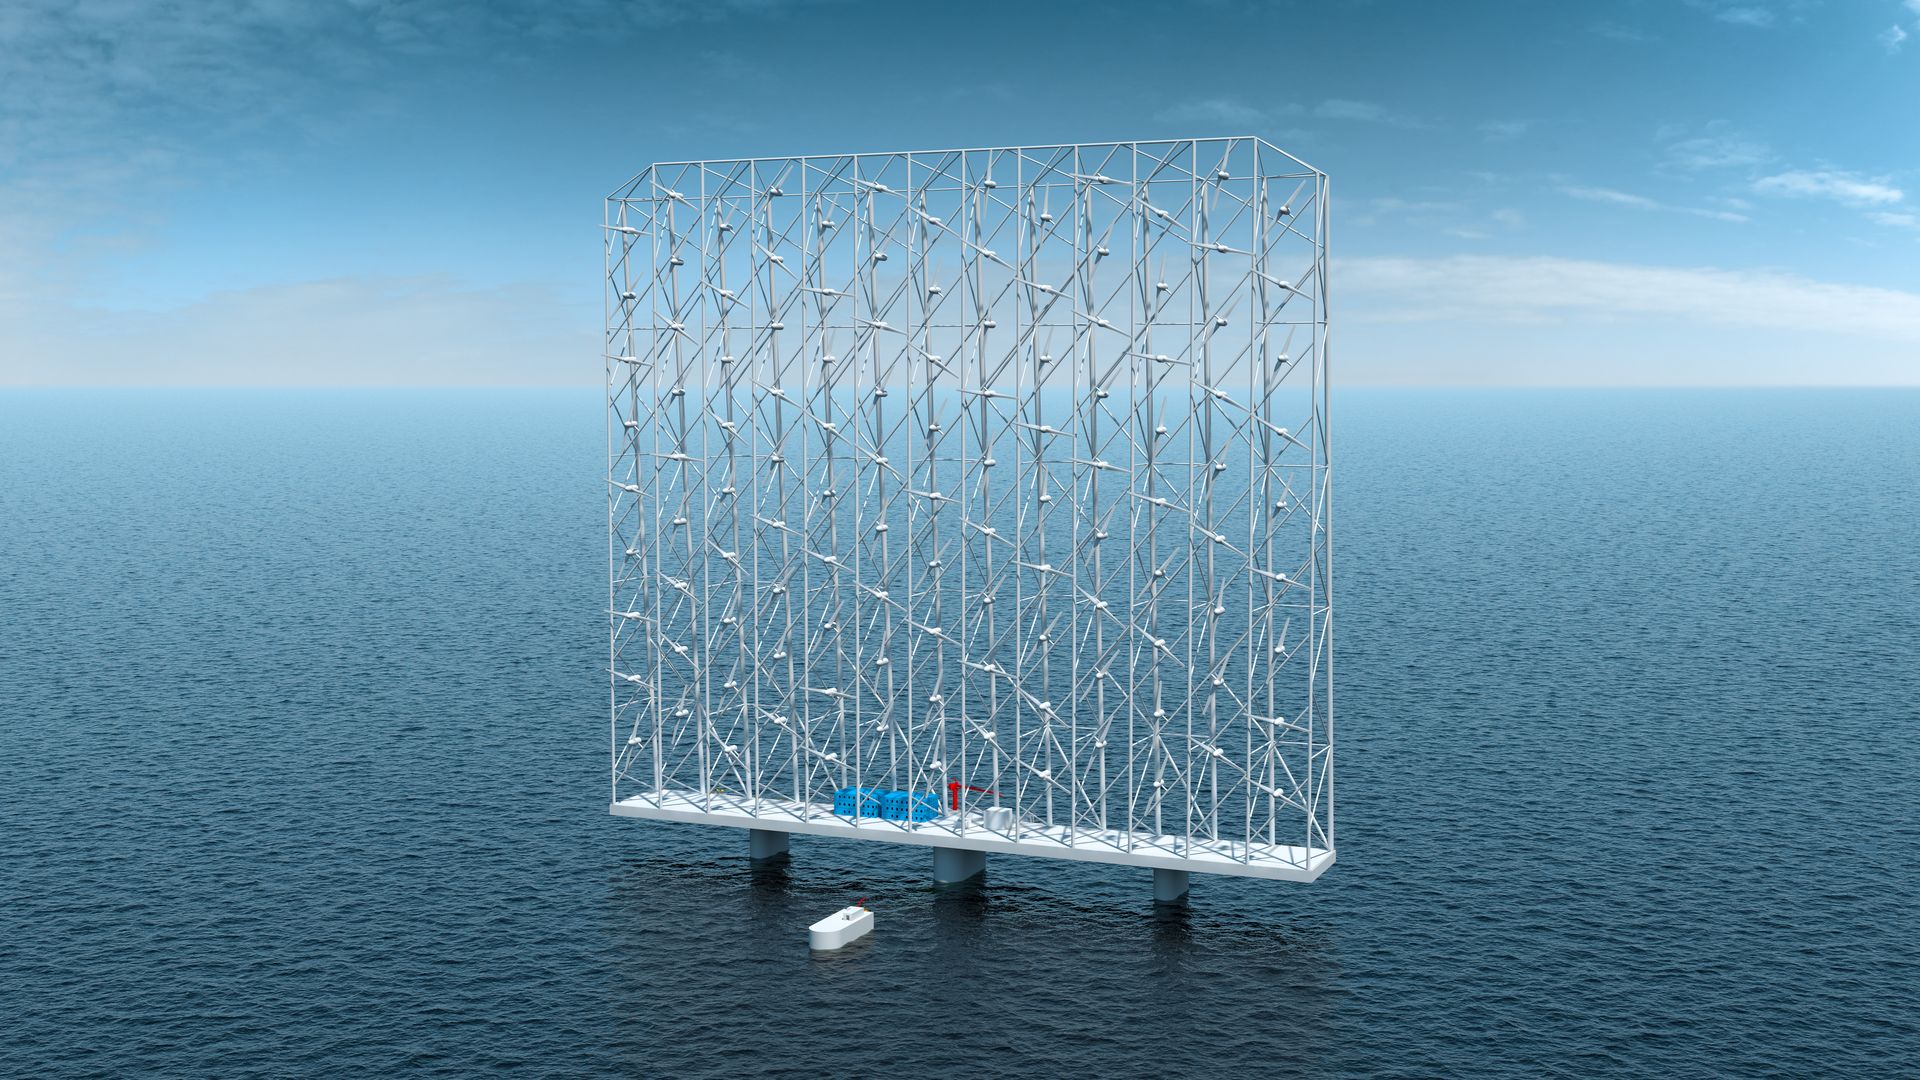 Image of a powerful floating wind turbine system in the ocean.